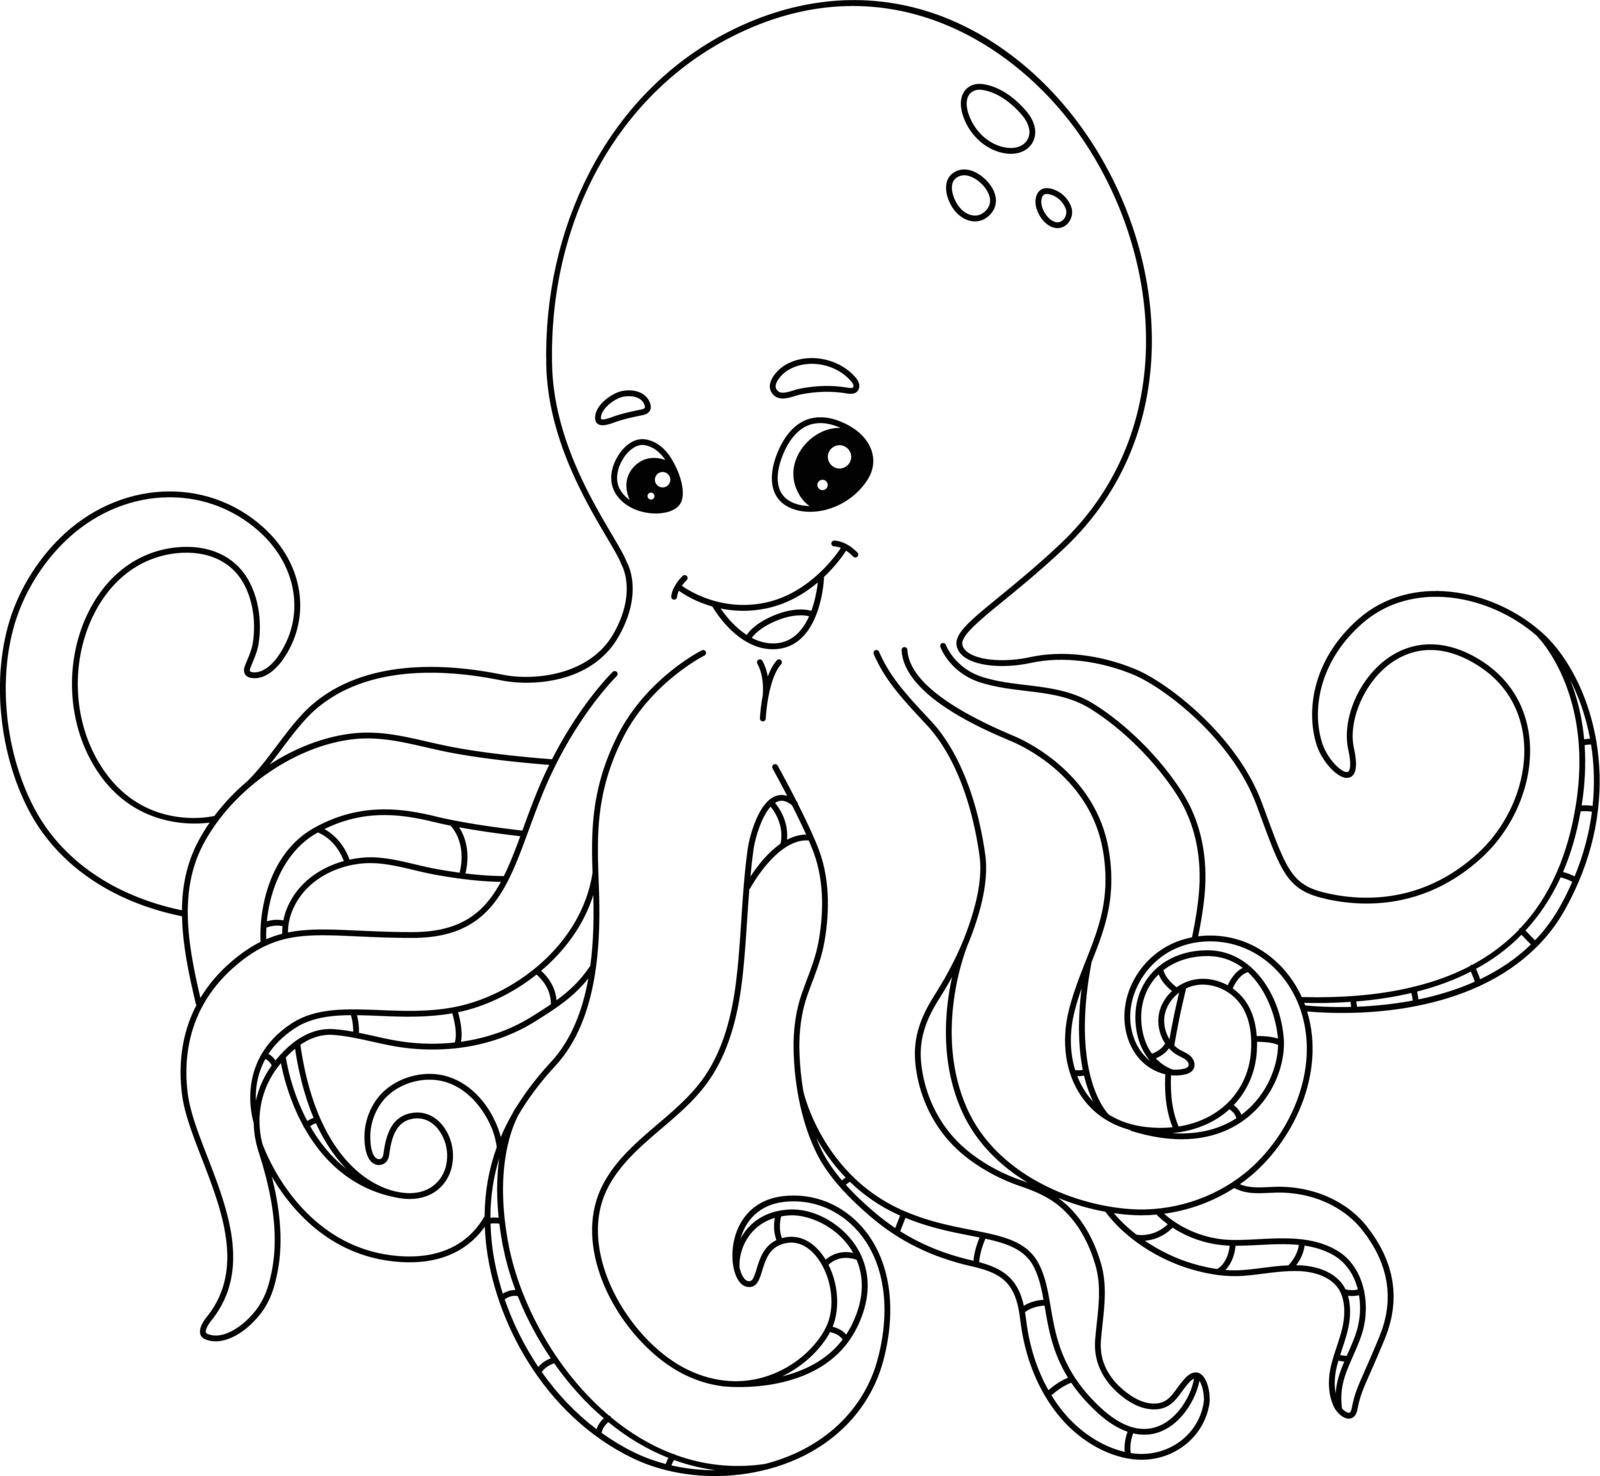 A cute and funny coloring page of an octopus. Provides hours of coloring fun for children. To color, this page is very easy. Suitable for little kids and toddlers.